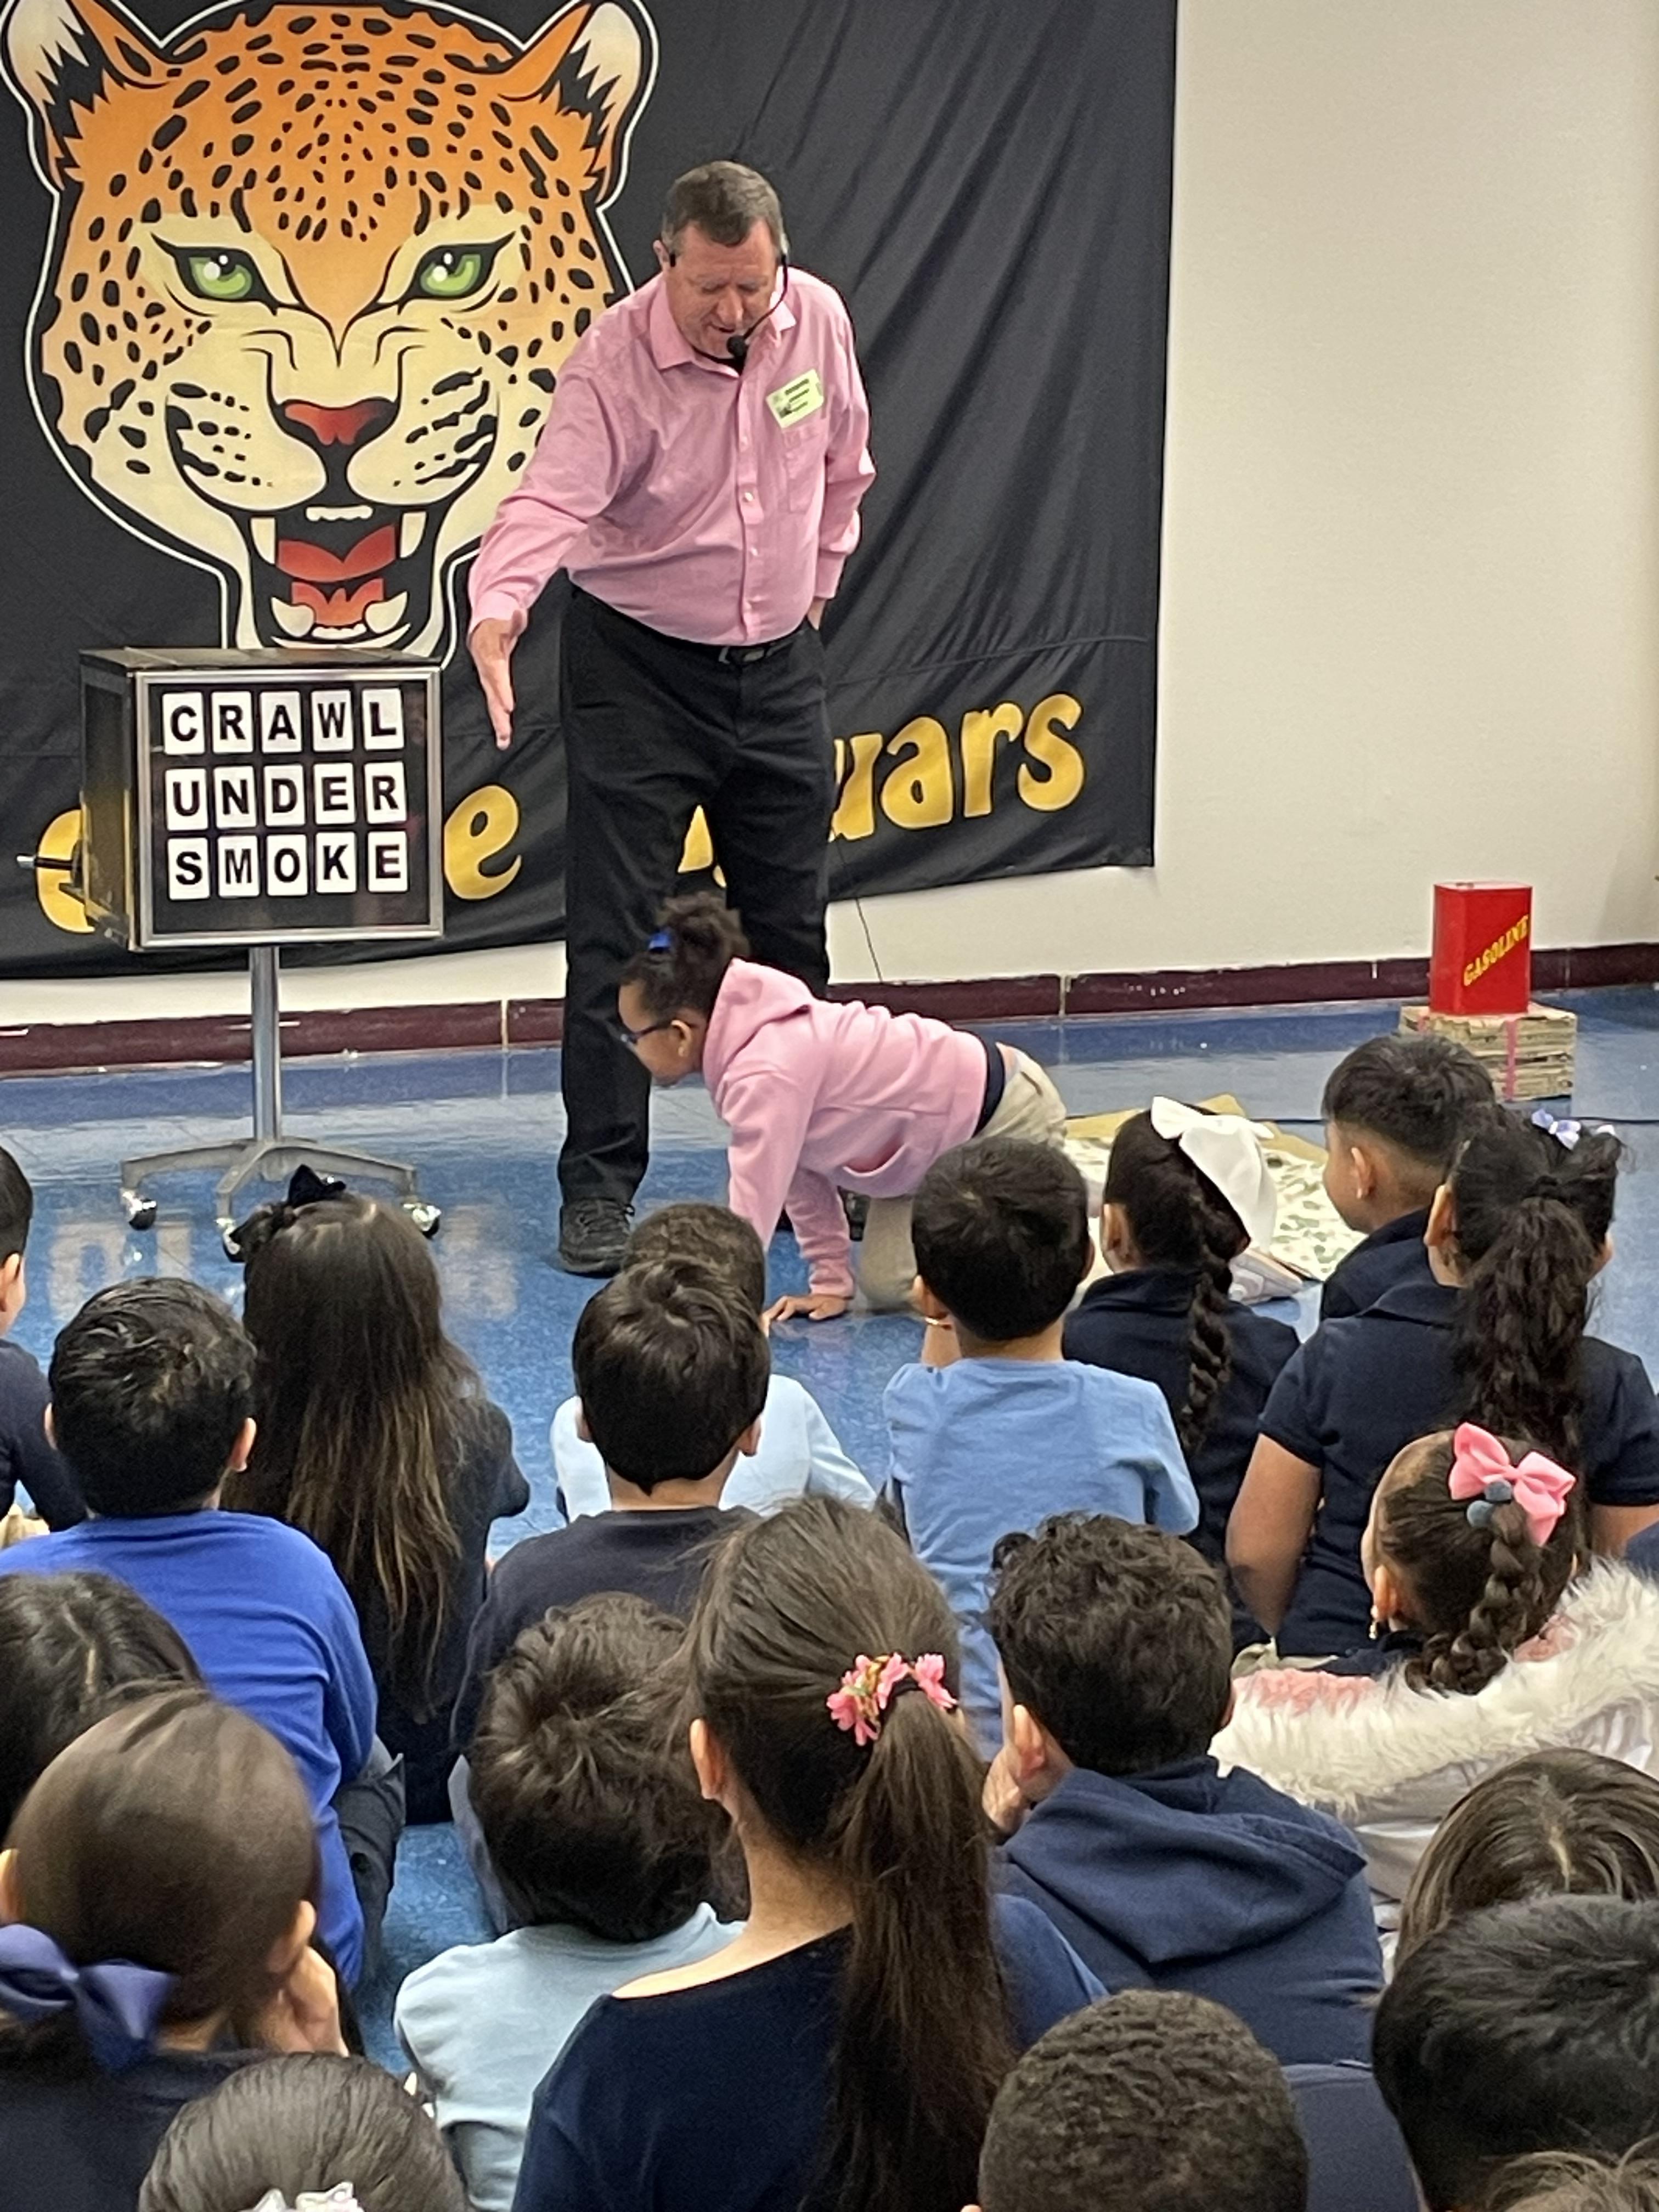 The Importance of Fire Safety at the Jefferson School